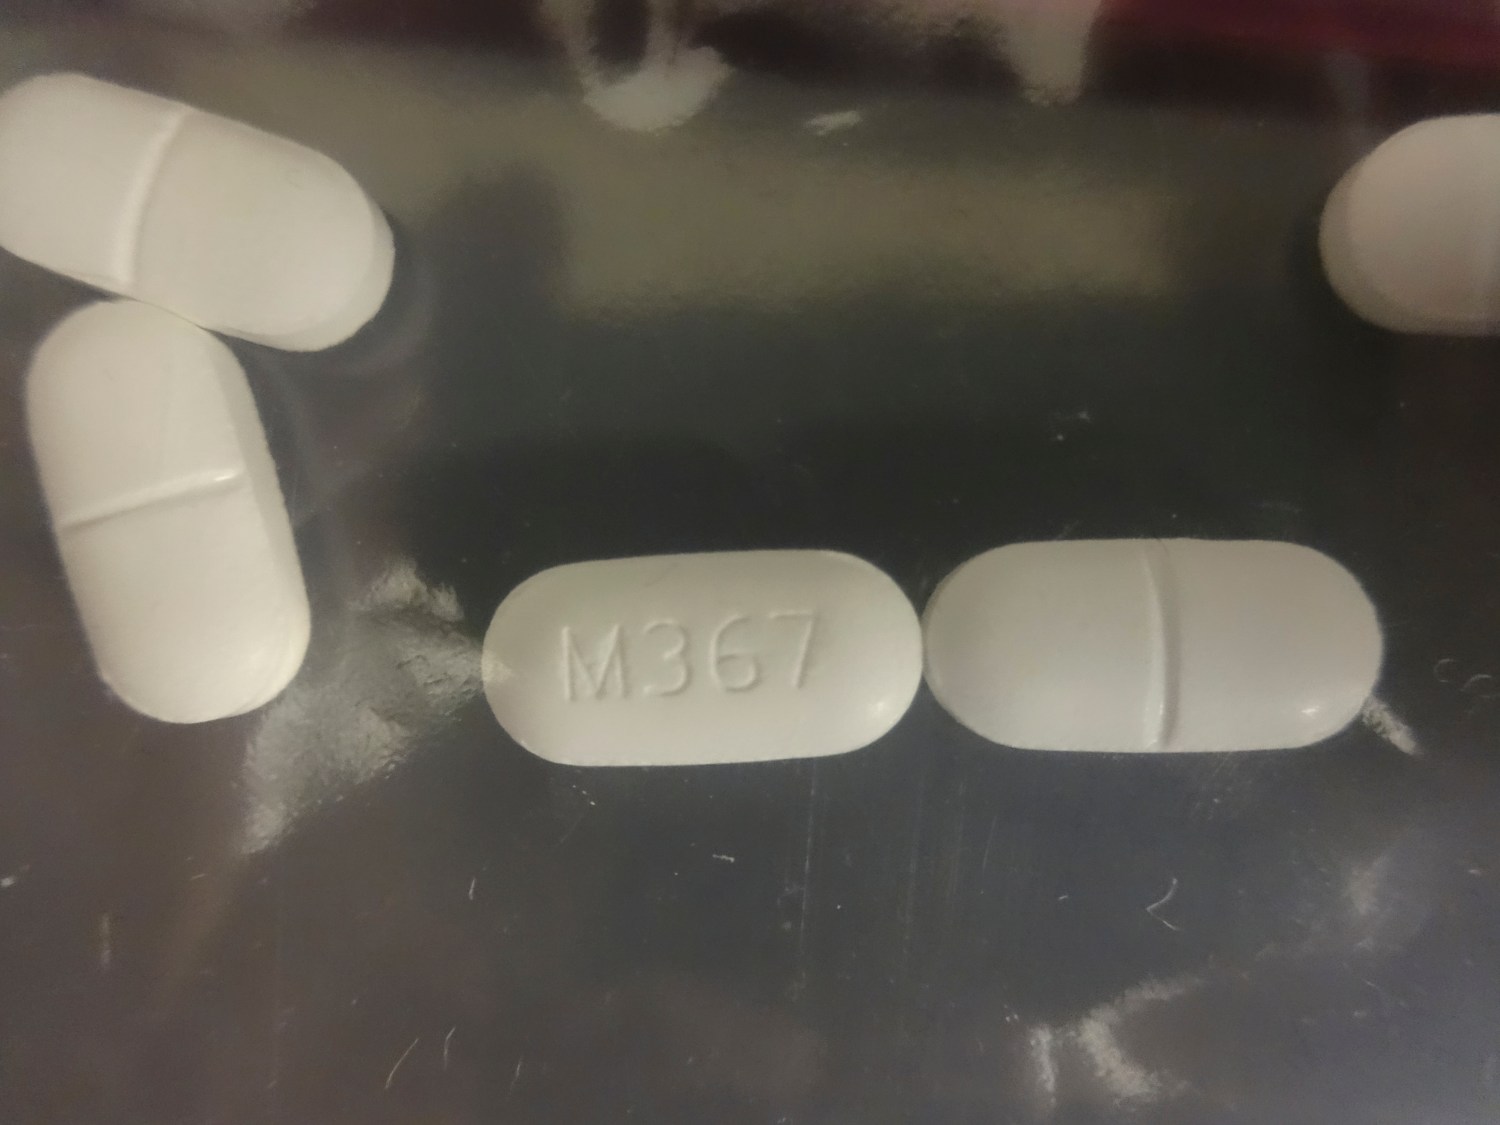 A seized counterfeit hydrocodone tablets in the investigation of a rash of fentanyl overdoses in northern California is shown in this Drug Enforcement Administration (DEA) photo released on April 4, 2016. At least 42 drug overdoses in the past two weeks have been reported in northern California, 10 of them fatal, in what authorities on Monday called the biggest cluster of poisonings linked to the powerful synthetic narcotic fentanyl ever to hit the U.S. West Coast.    REUTERS/Drug Enforcement Administration/Handout via Reuters    FOR EDITORIAL USE ONLY. NOT FOR SALE FOR MARKETING OR ADVERTISING CAMPAIGNS. THIS IMAGE HAS BEEN SUPPLIED BY A THIRD PARTY. IT IS DISTRIBUTED, EXACTLY AS RECEIVED BY REUTERS, AS A SERVICE TO CLIENTS